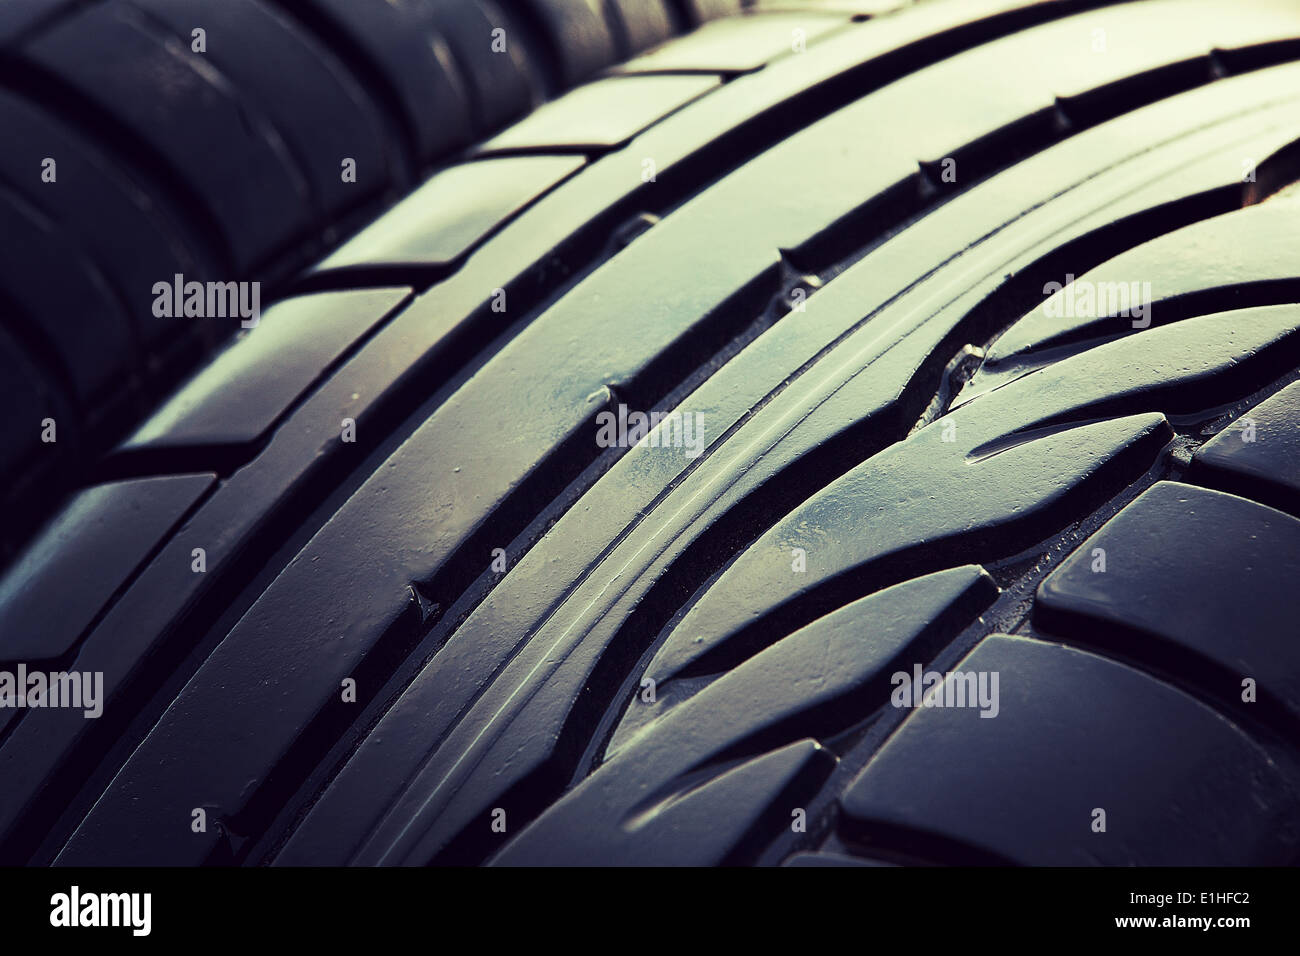 hi-res and stock Worn - Alamy race photography images tires